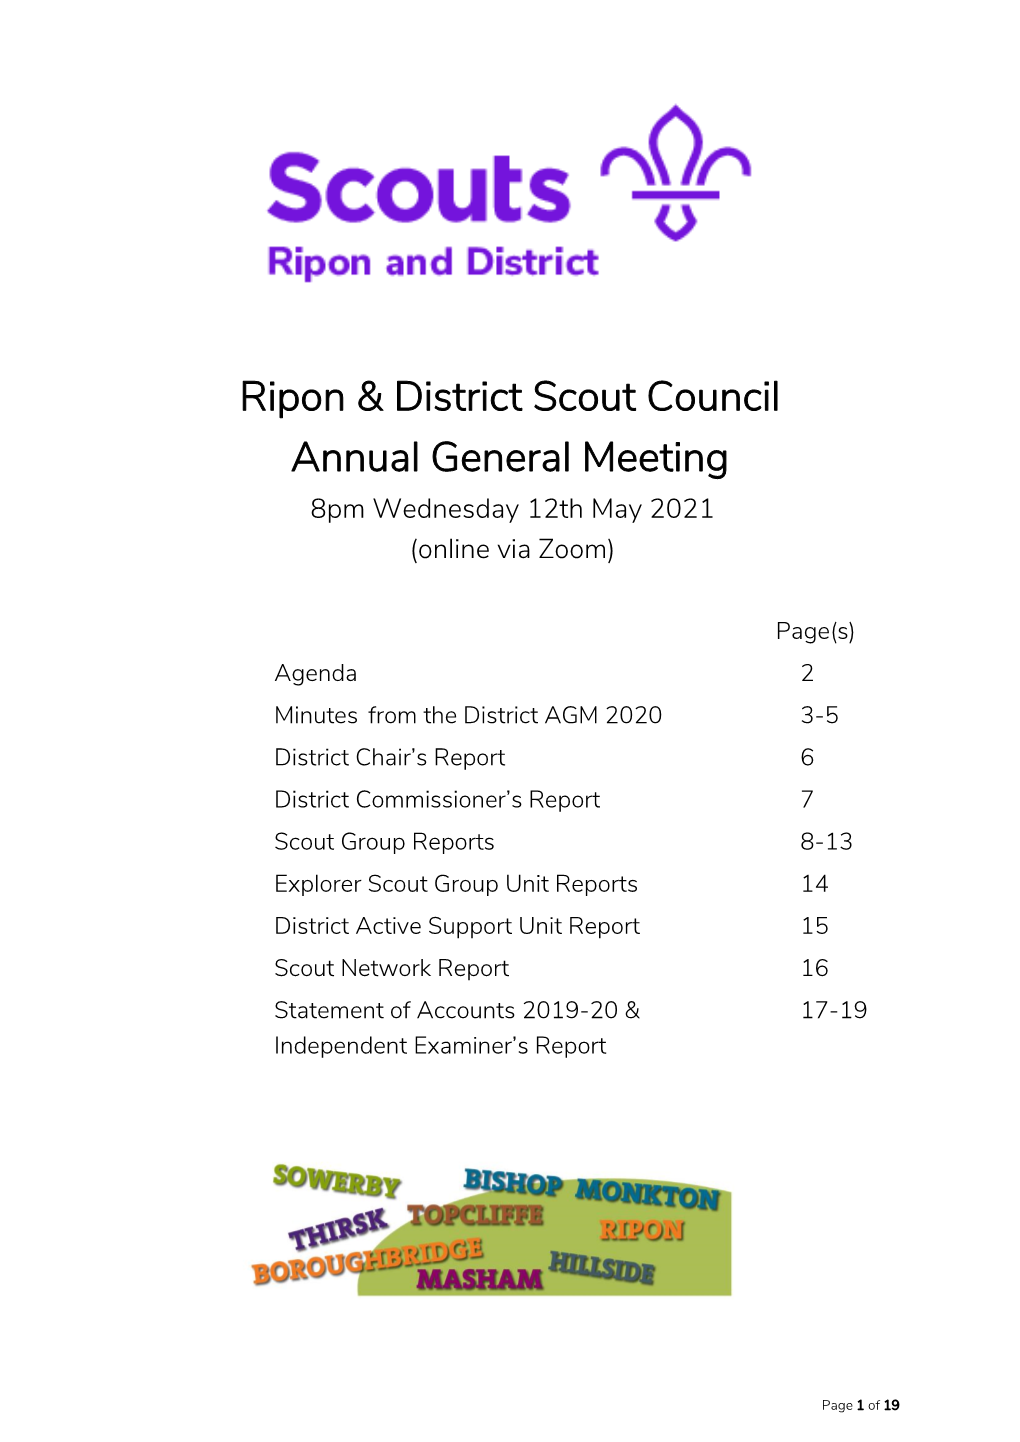 Ripon & District Scout Council Annual General Meeting